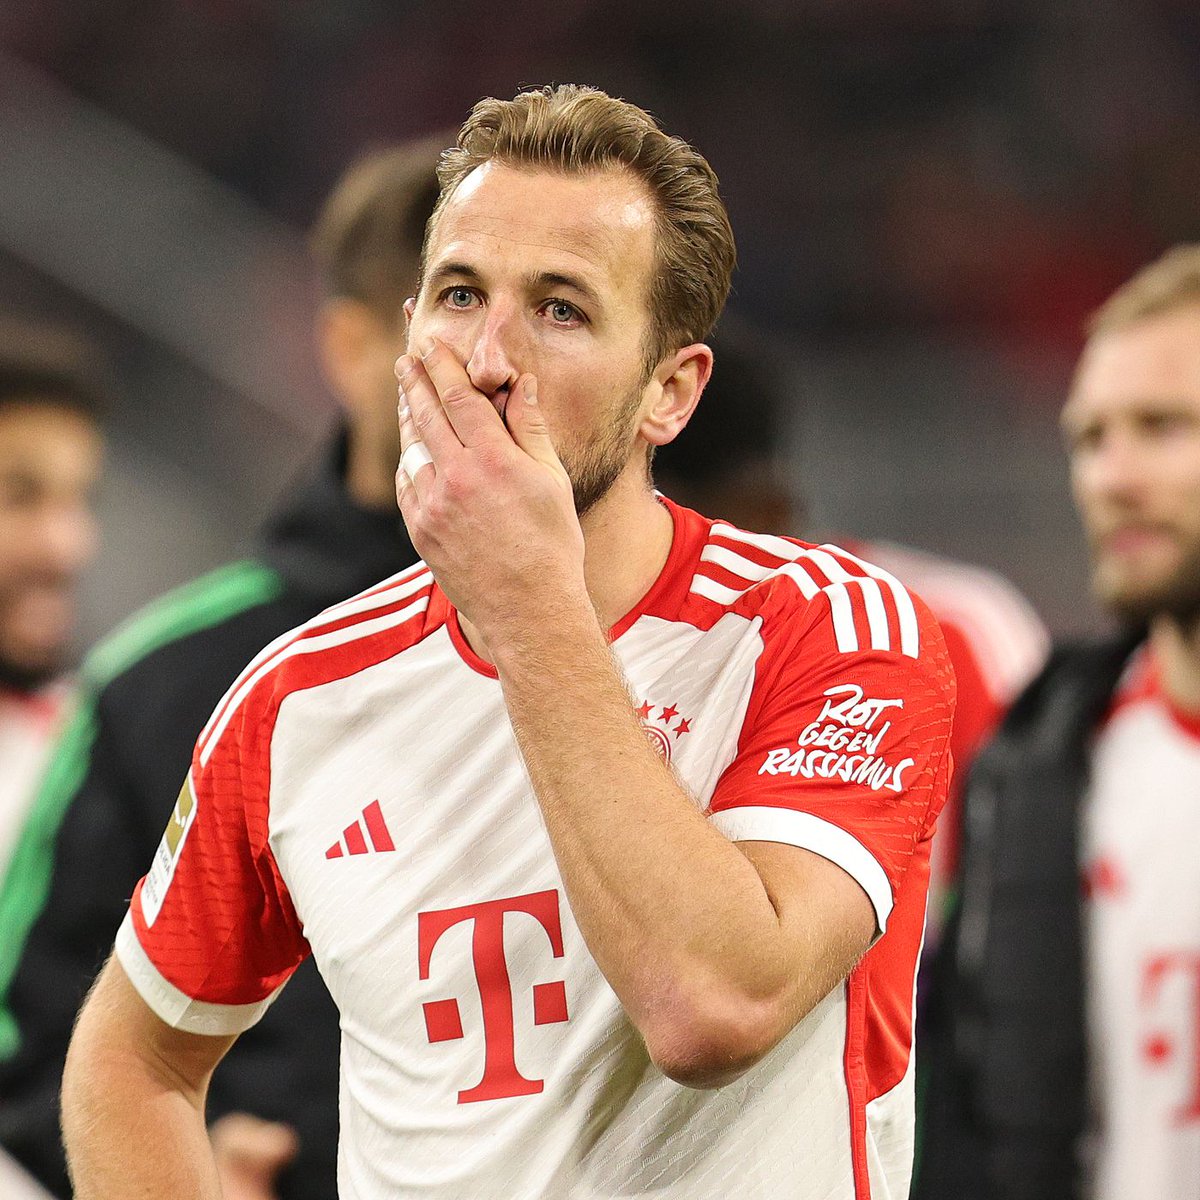 🚨⁉️ DISCUSS: Following Bayern's elimination from the Champions League tonight, did Harry Kane make a mistake joining the Germans? 🤔 #FCBayern